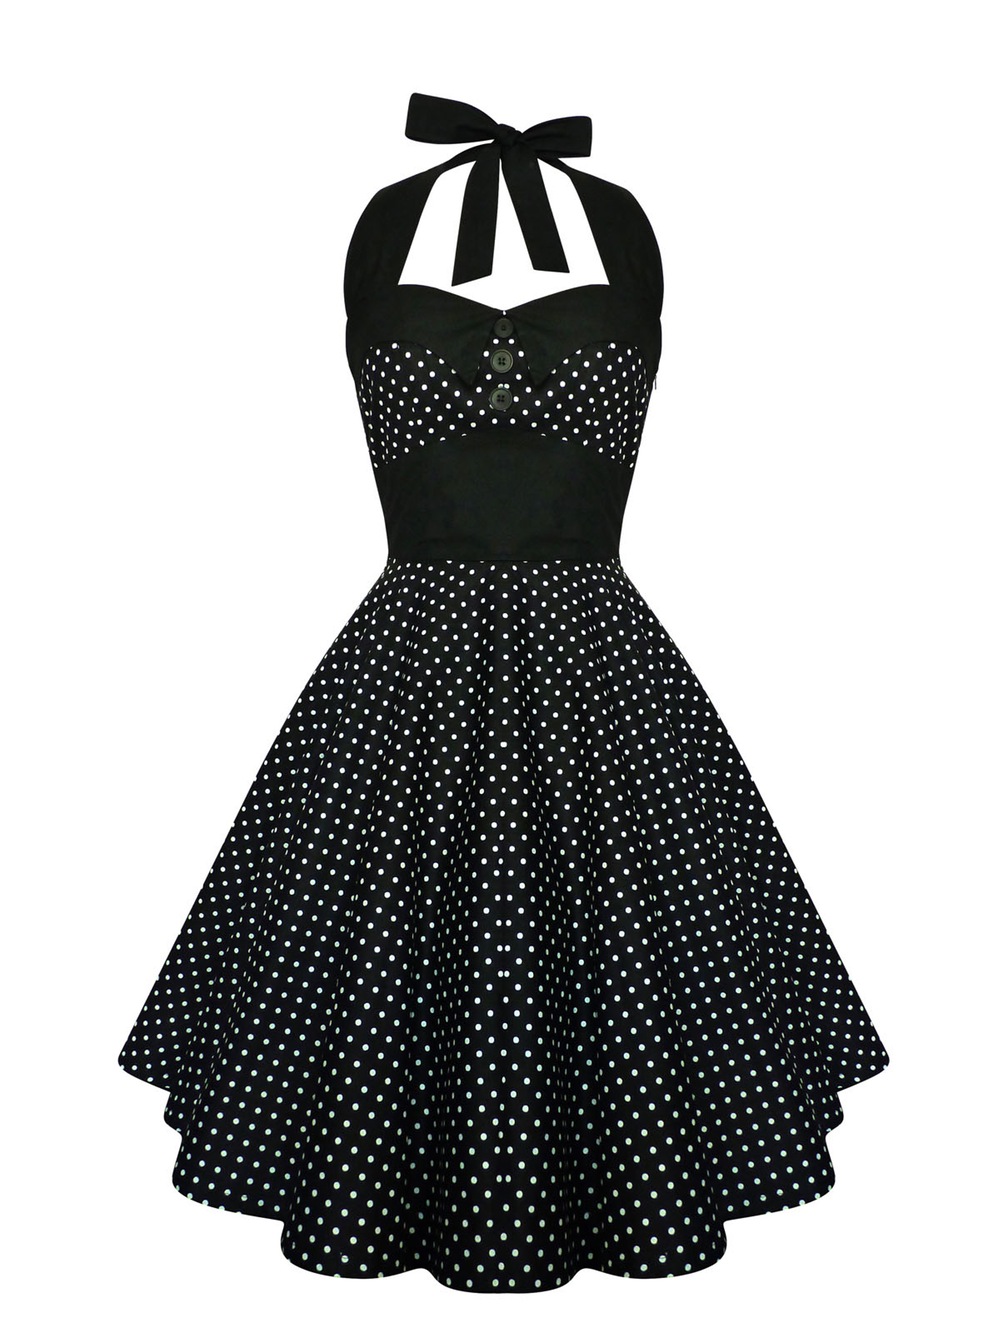 Rockabilly Dresses & 1950s Vintage Inspired Pin Up Dresses All products.